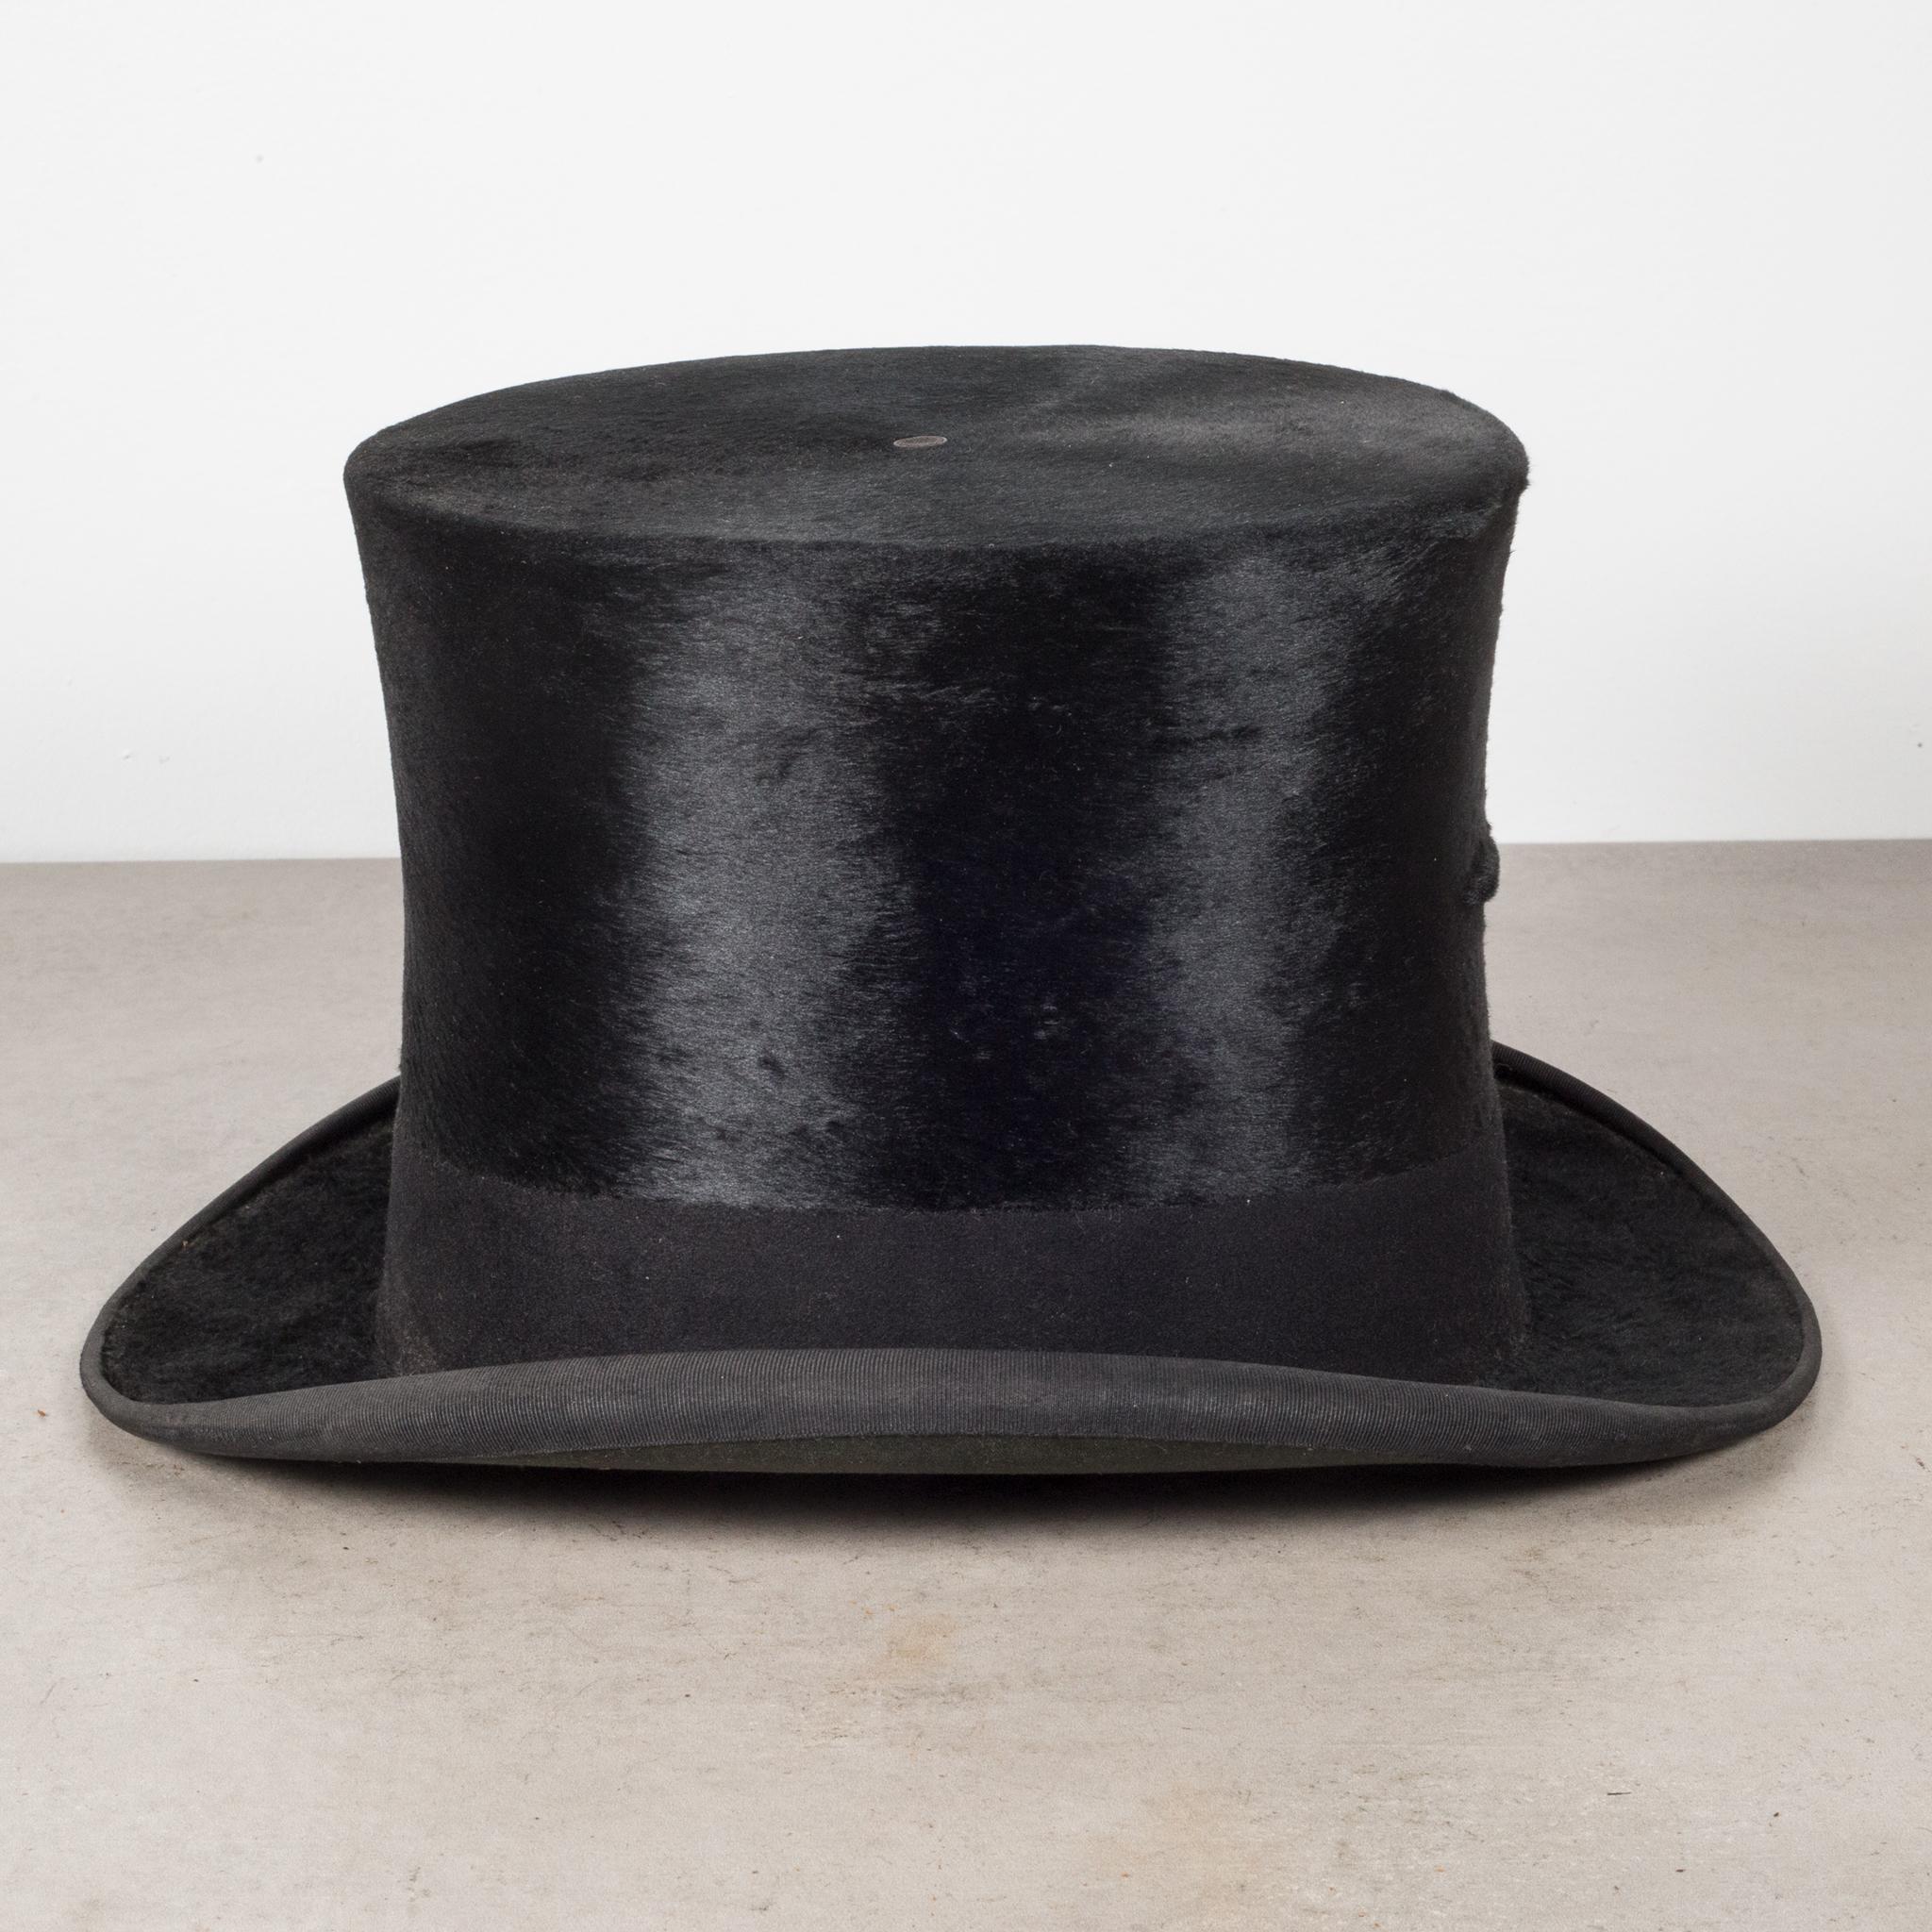 About

An original Beaver fur top hat.

Creator Miller New York.
Date of manufacture c.1920-1940.
Materials and techniques beaver fur.
Condition good. Wear consistent with age and use.
Dimensions hat: H 6 in. D 9.5 in. W 11.75